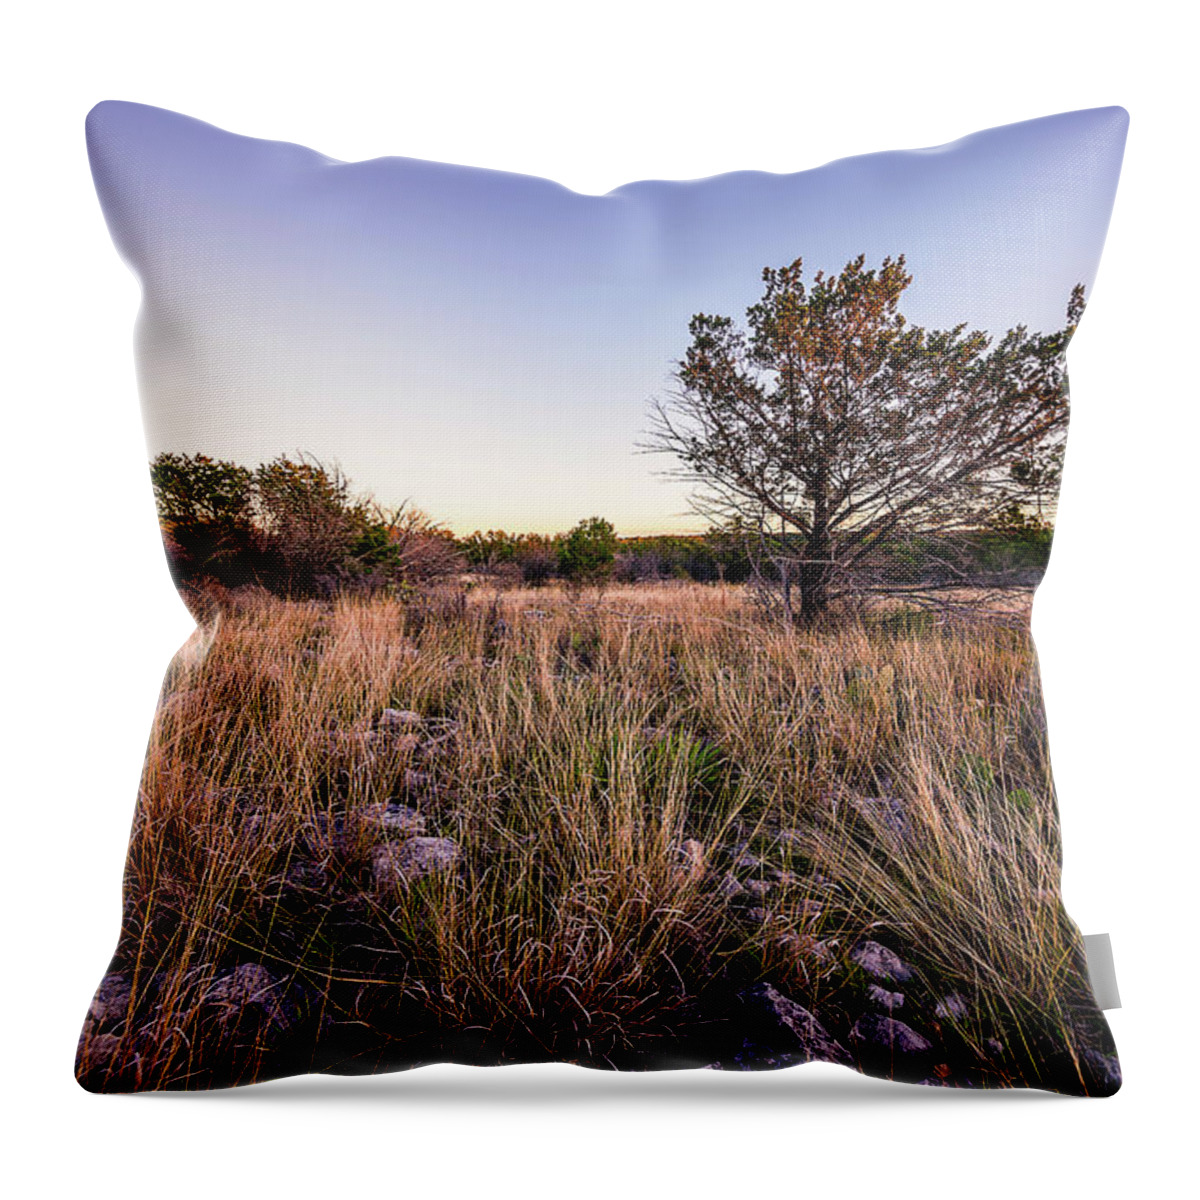 Colorado Throw Pillow featuring the photograph Colorado Bend State Park Gorman Falls Trail #2 by Micah Goff